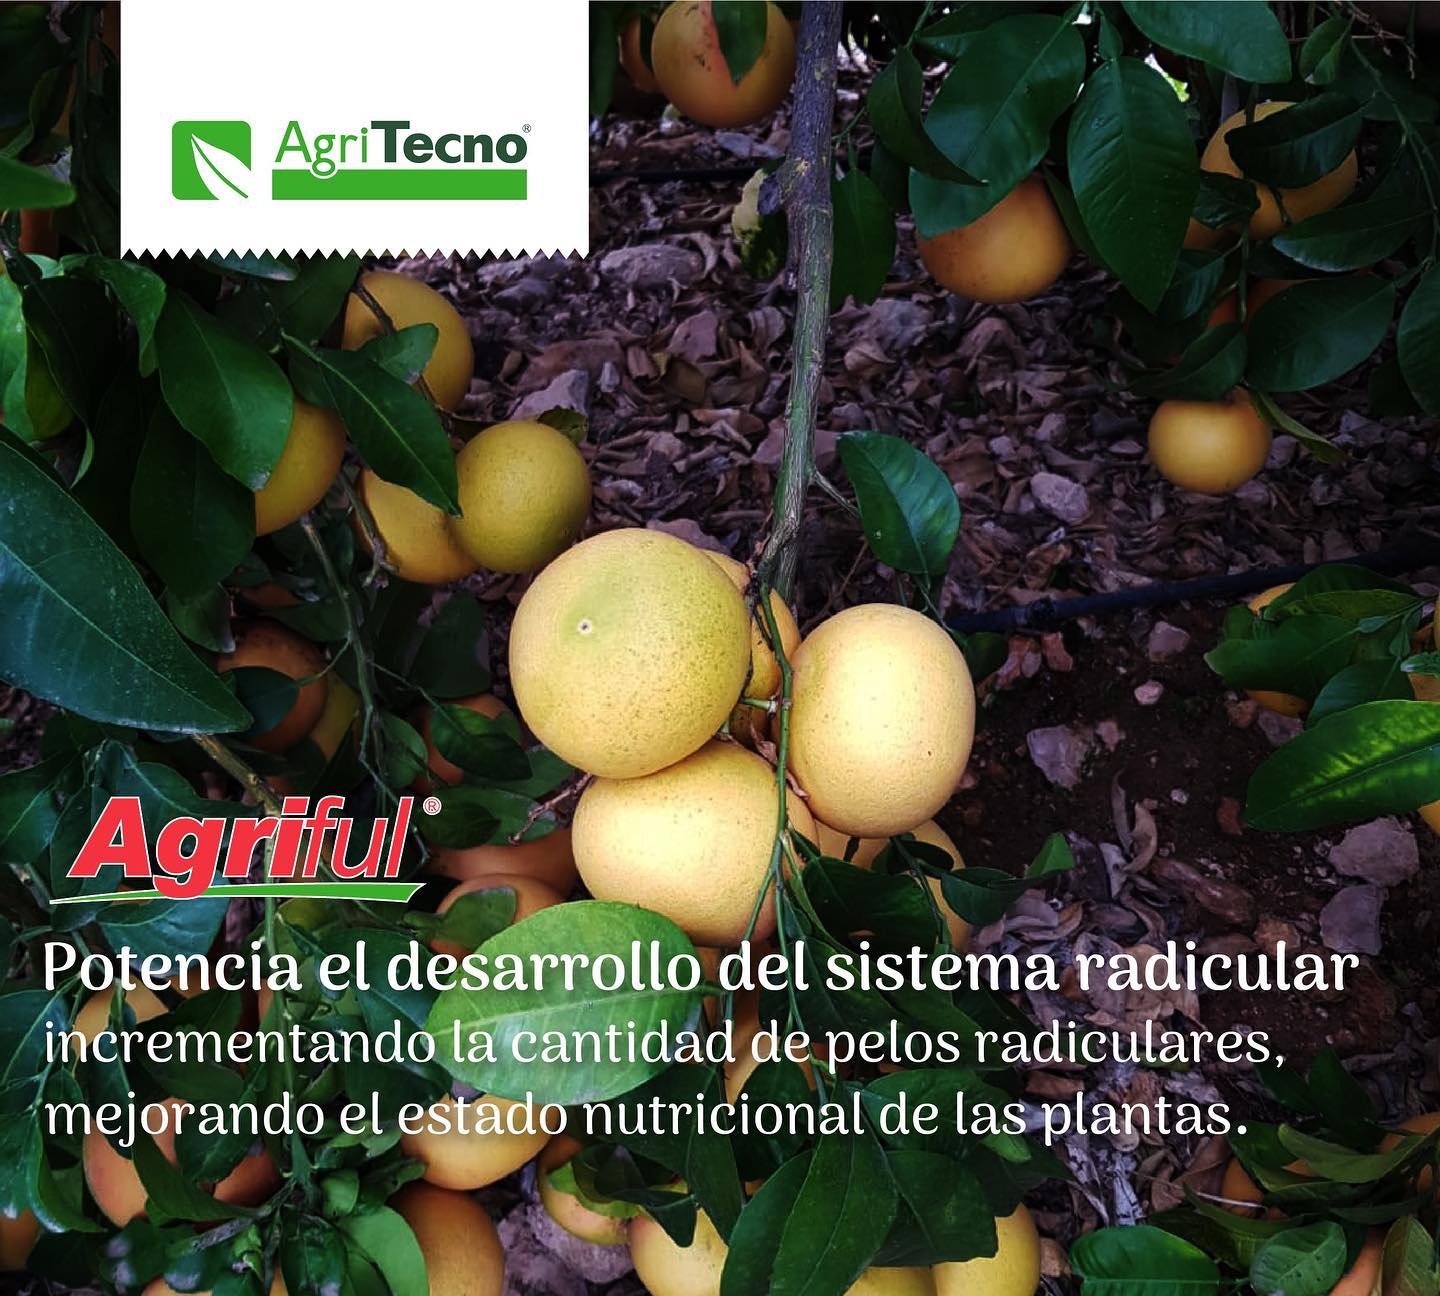 #Agriful It strengthens the development of the #rootsystem by increasing the number of #roothairs, improving the nutritional status of #plants. Anti-stress and detoxifying effect. It increases the pop…